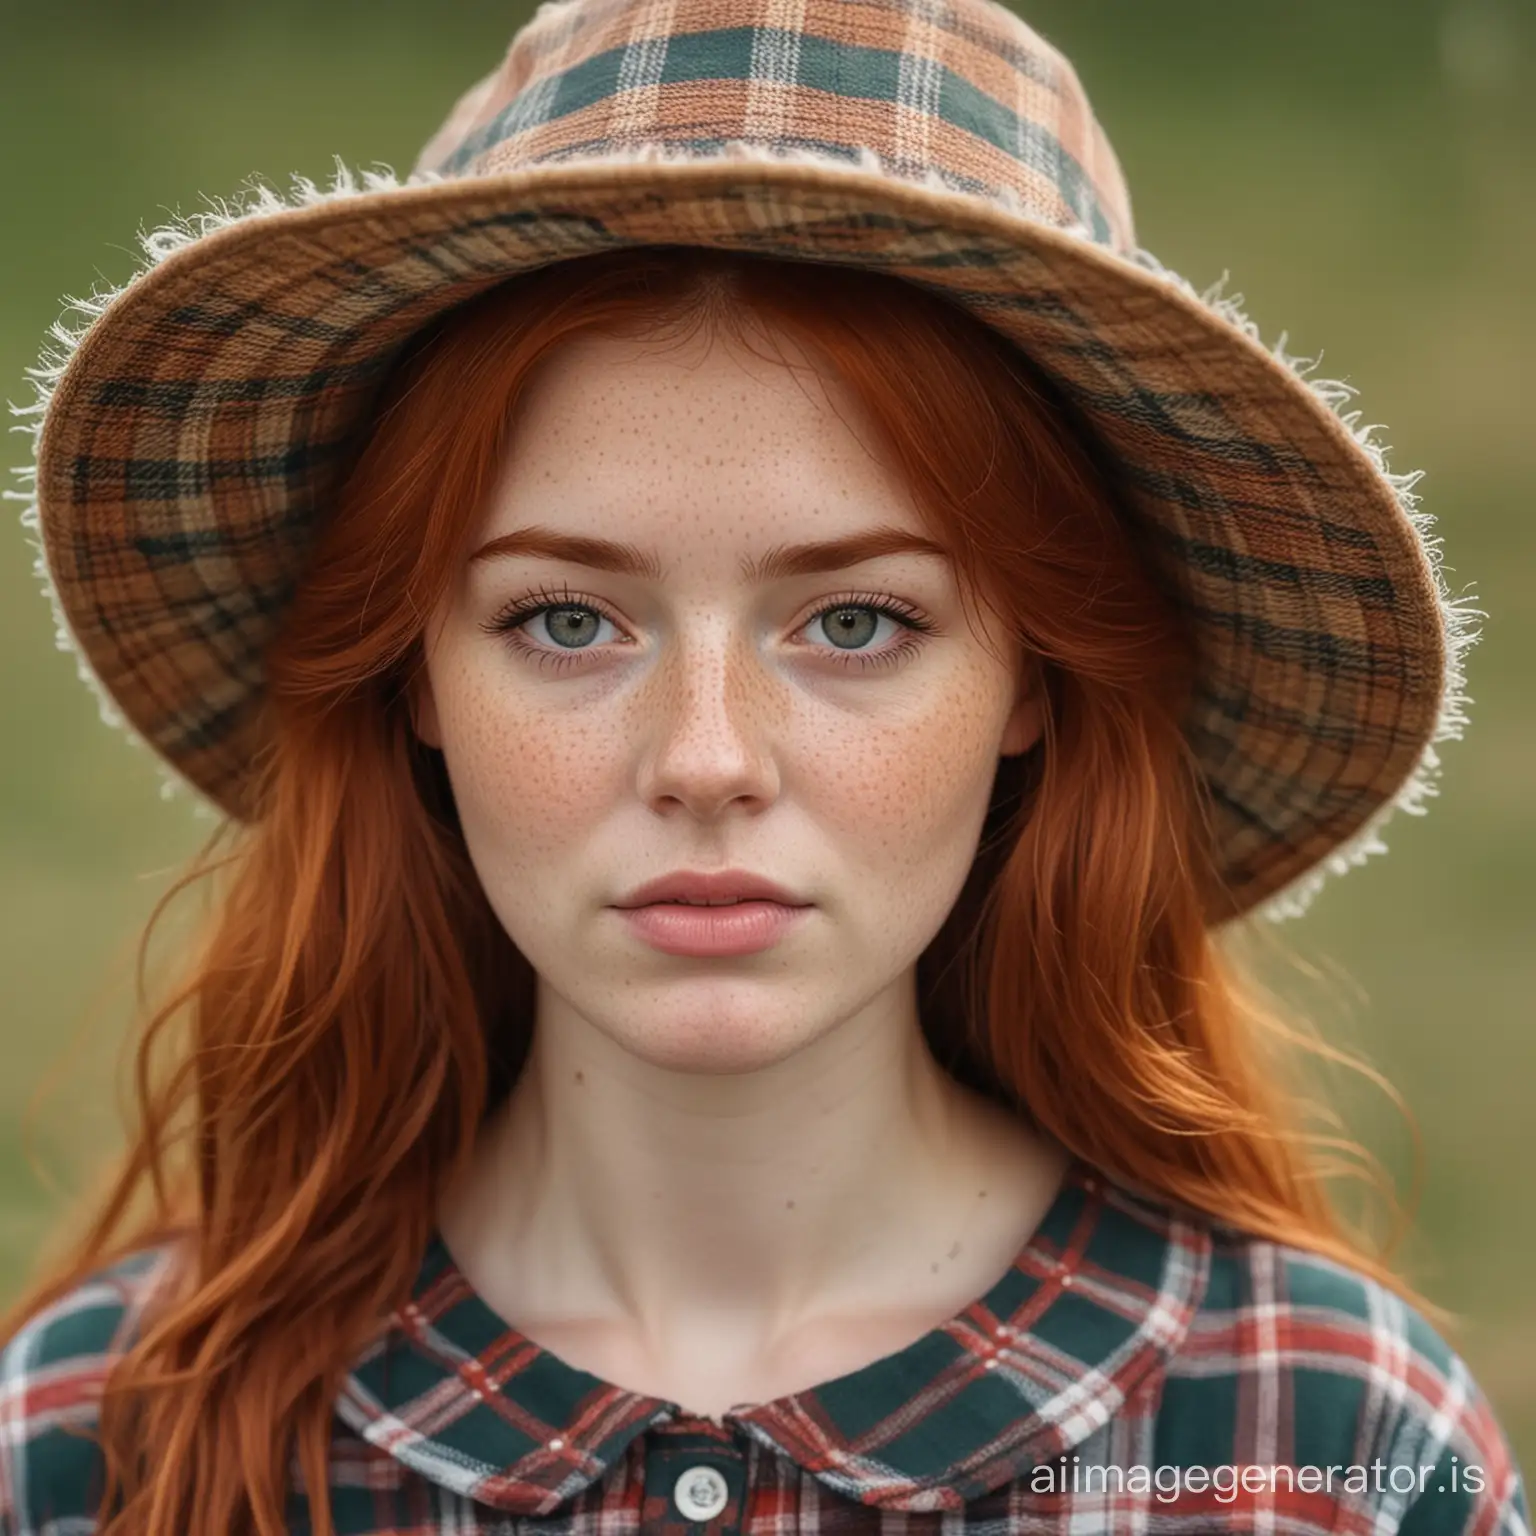 The translation of input: The redhead girl in a hat in a plaid dress with freckles on her face